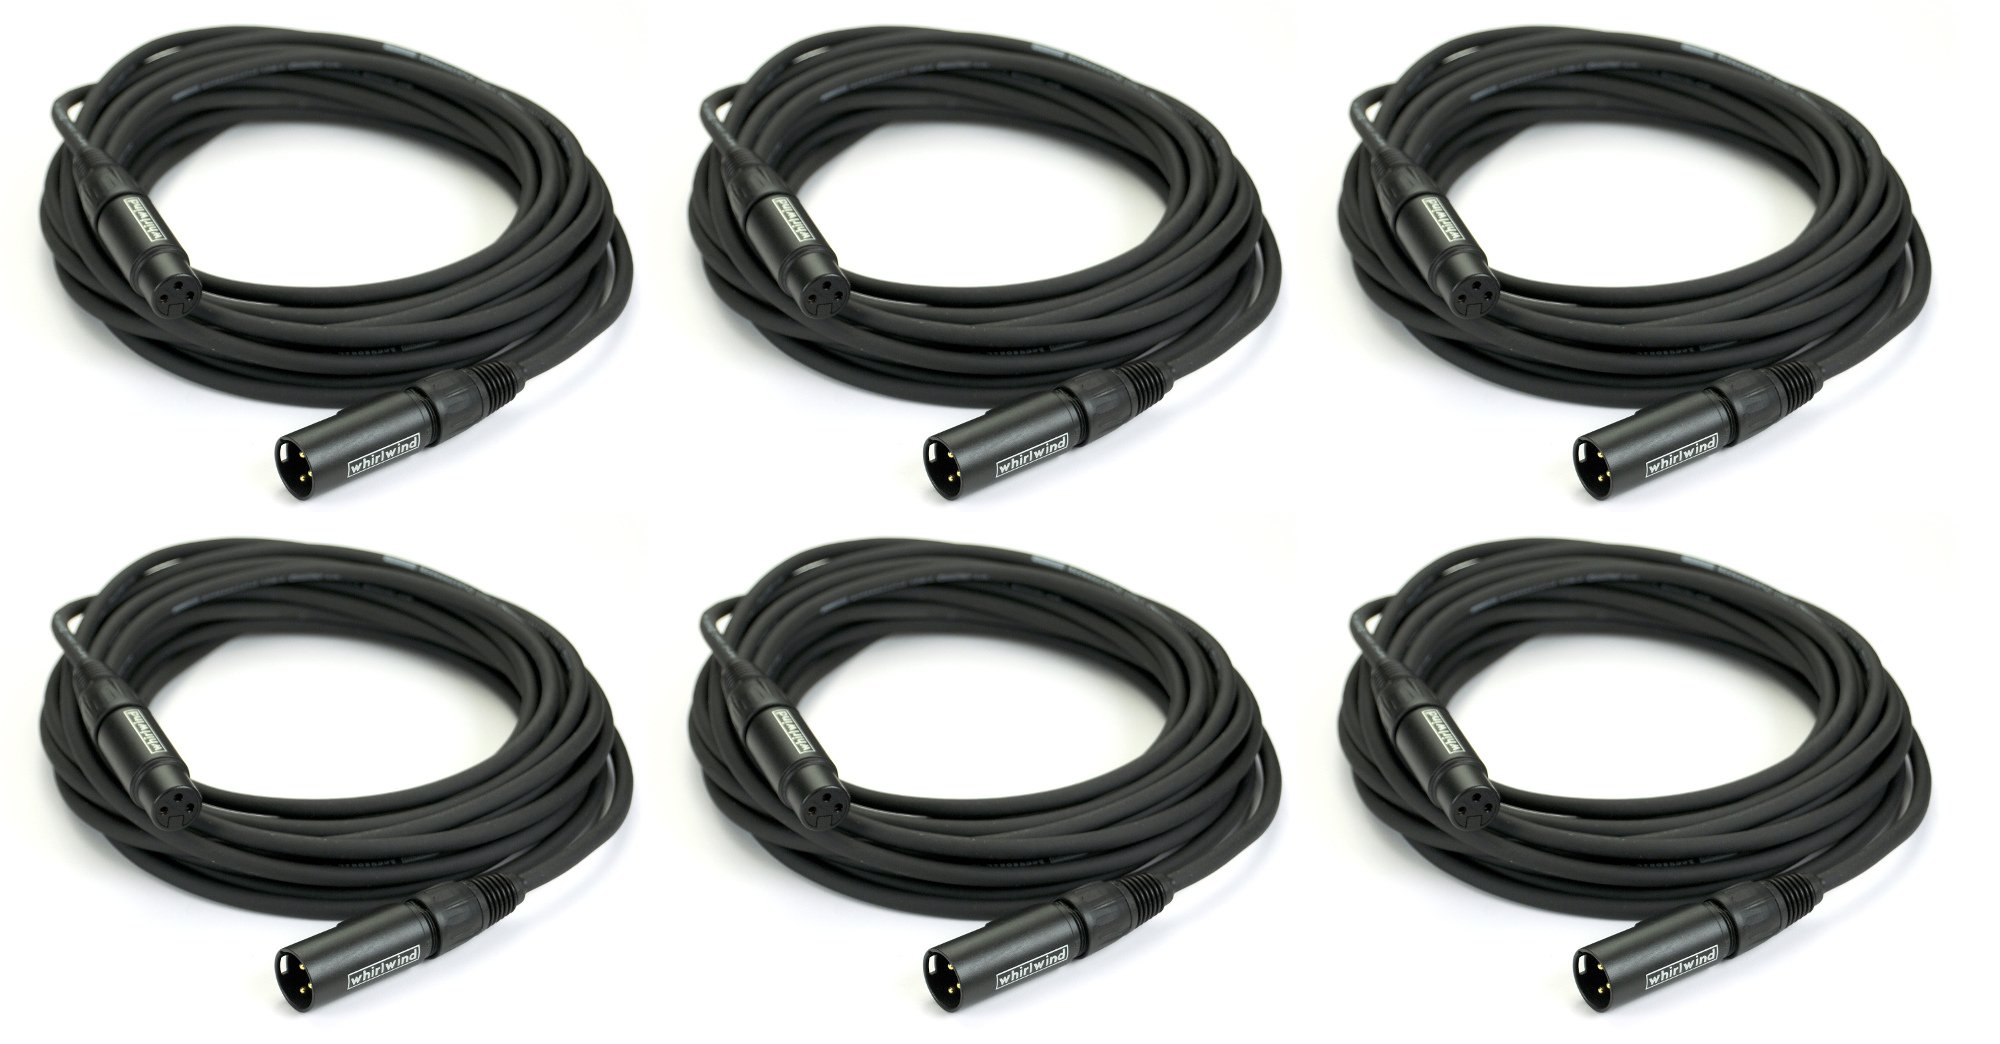 Whirlwind MK425-PK6-K Microphone Cable Bundle with 6 MK425 XLR Microphone Cables - Picture 1 of 1